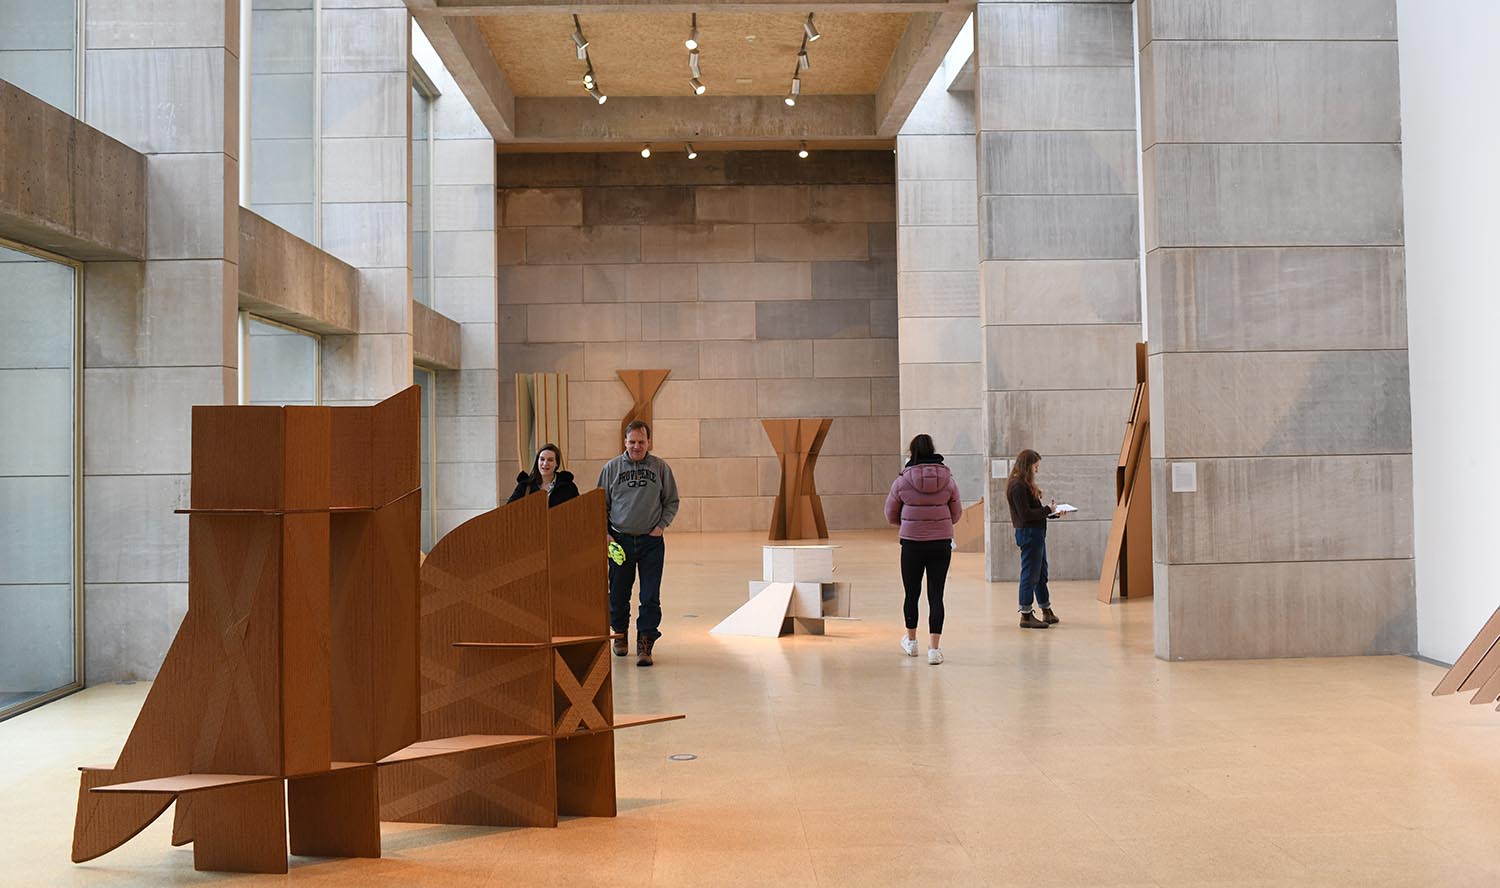 "Diane Simpson: Cardboard-Plus, 1977–1980" is on exhibit through March 1 at the Zilkha Gallery, at 283 Washington Terrace. In this installation, Simpson presents her large-scale cardboard sculptures and collaged constructions in their most comprehensive presentation since 1980. These works represent an important transition in the artist’s practice, from drawing and printmaking into sculpture. Simpson's later work, for which she is so well-known, contains references to the architecture of clothing and fashion. In contrast, the body of work in "Cardboard-Plus" is much more formal in nature. "Cardboard-Plus" is a rare moment to view works by the artist not often seen in the last 40 years. The gallery is open noon to 5 p.m. Tuesdays and Wednesdays; noon to 7 p.m. Thursdays; and noon to 5 p.m. Fridays through Sundays. (Photo courtesy of the Center for the Arts)